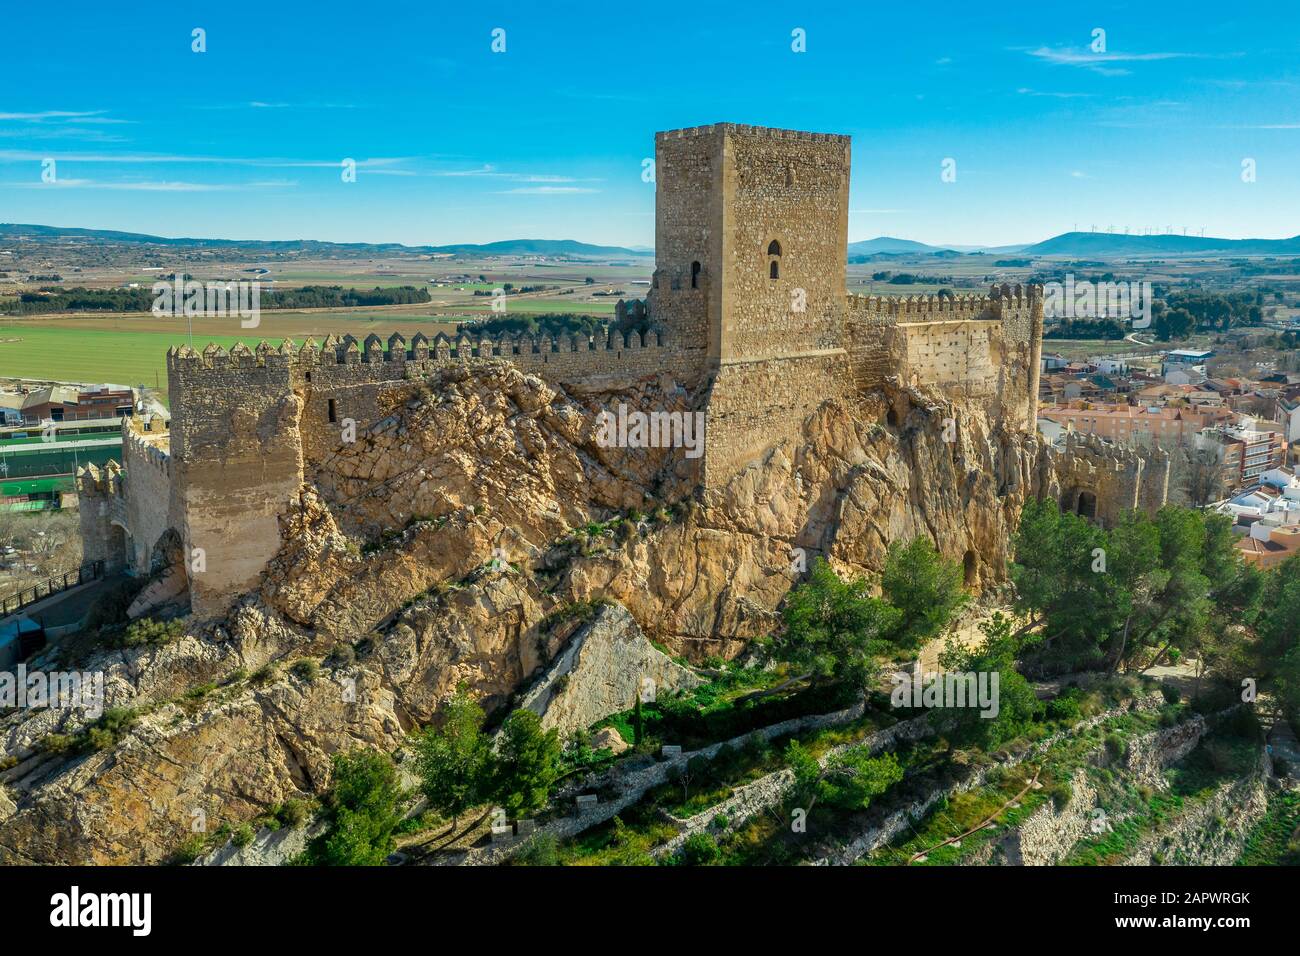 Aerial view of medieval Almansa castle with donjon and courtyard on a rock emerging from the plateau surrounded by a circular ring of red roof houses Stock Photo